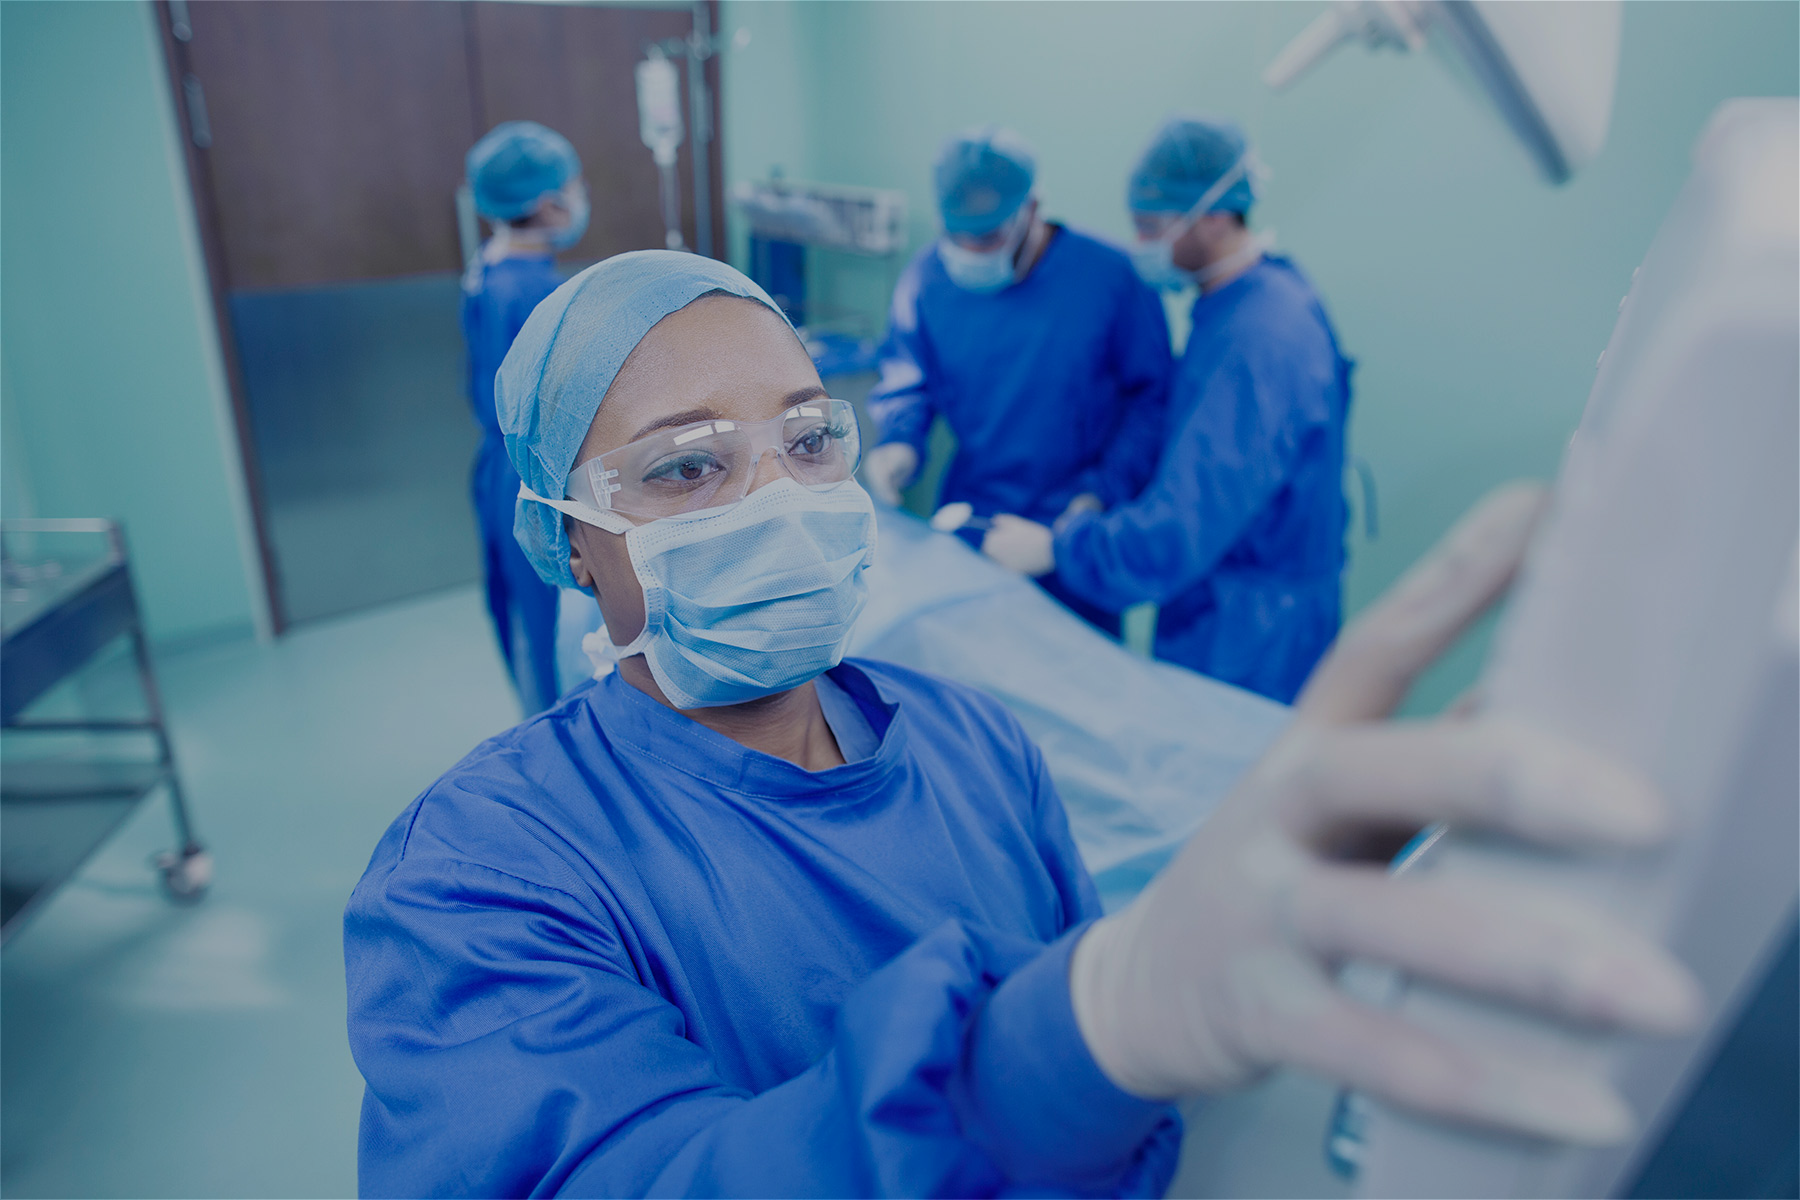 Image of a surgeon in an operating theater with their hand on a medical device 